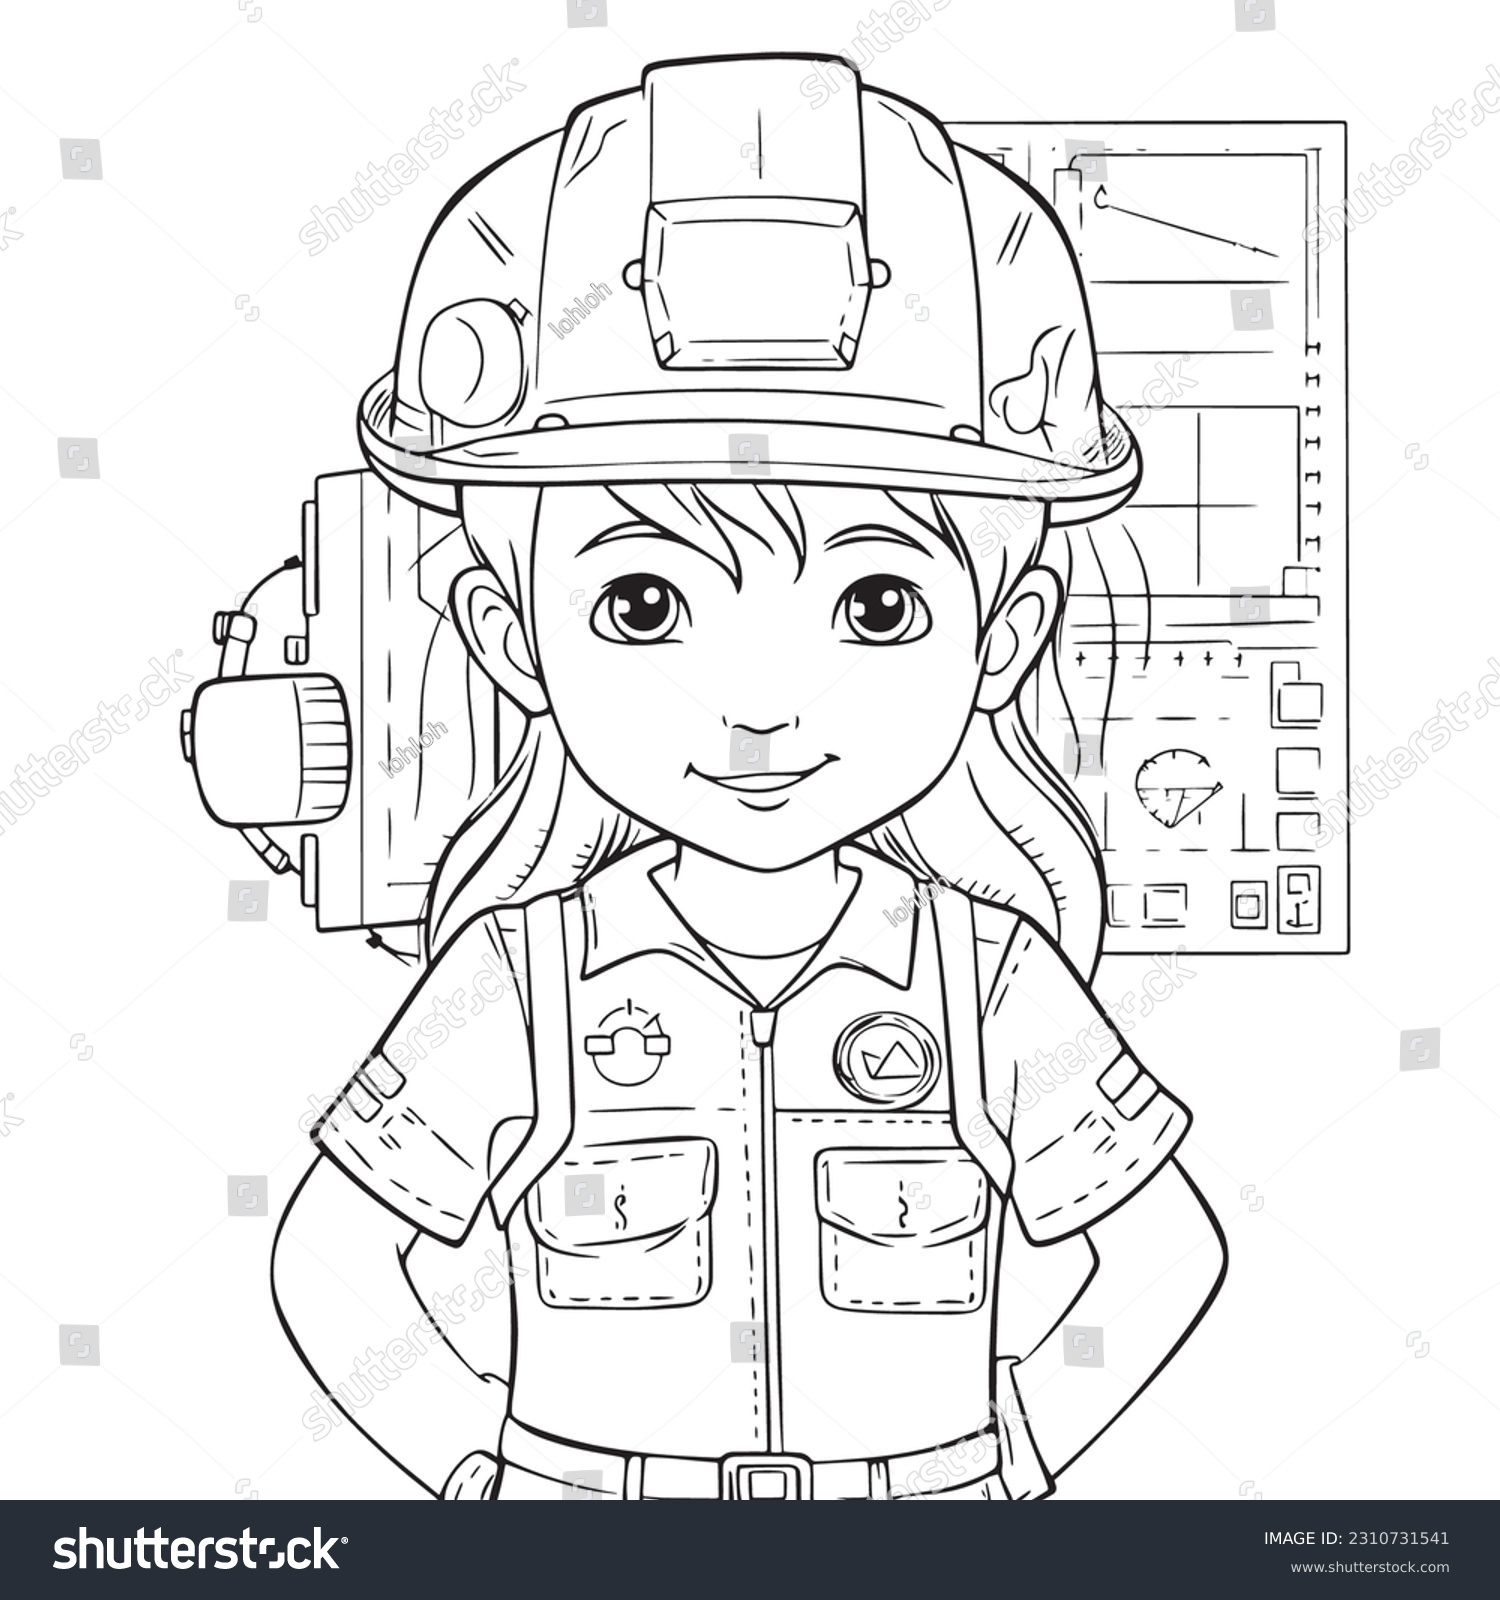 Engineer black white coloring pages kids stock vector royalty free